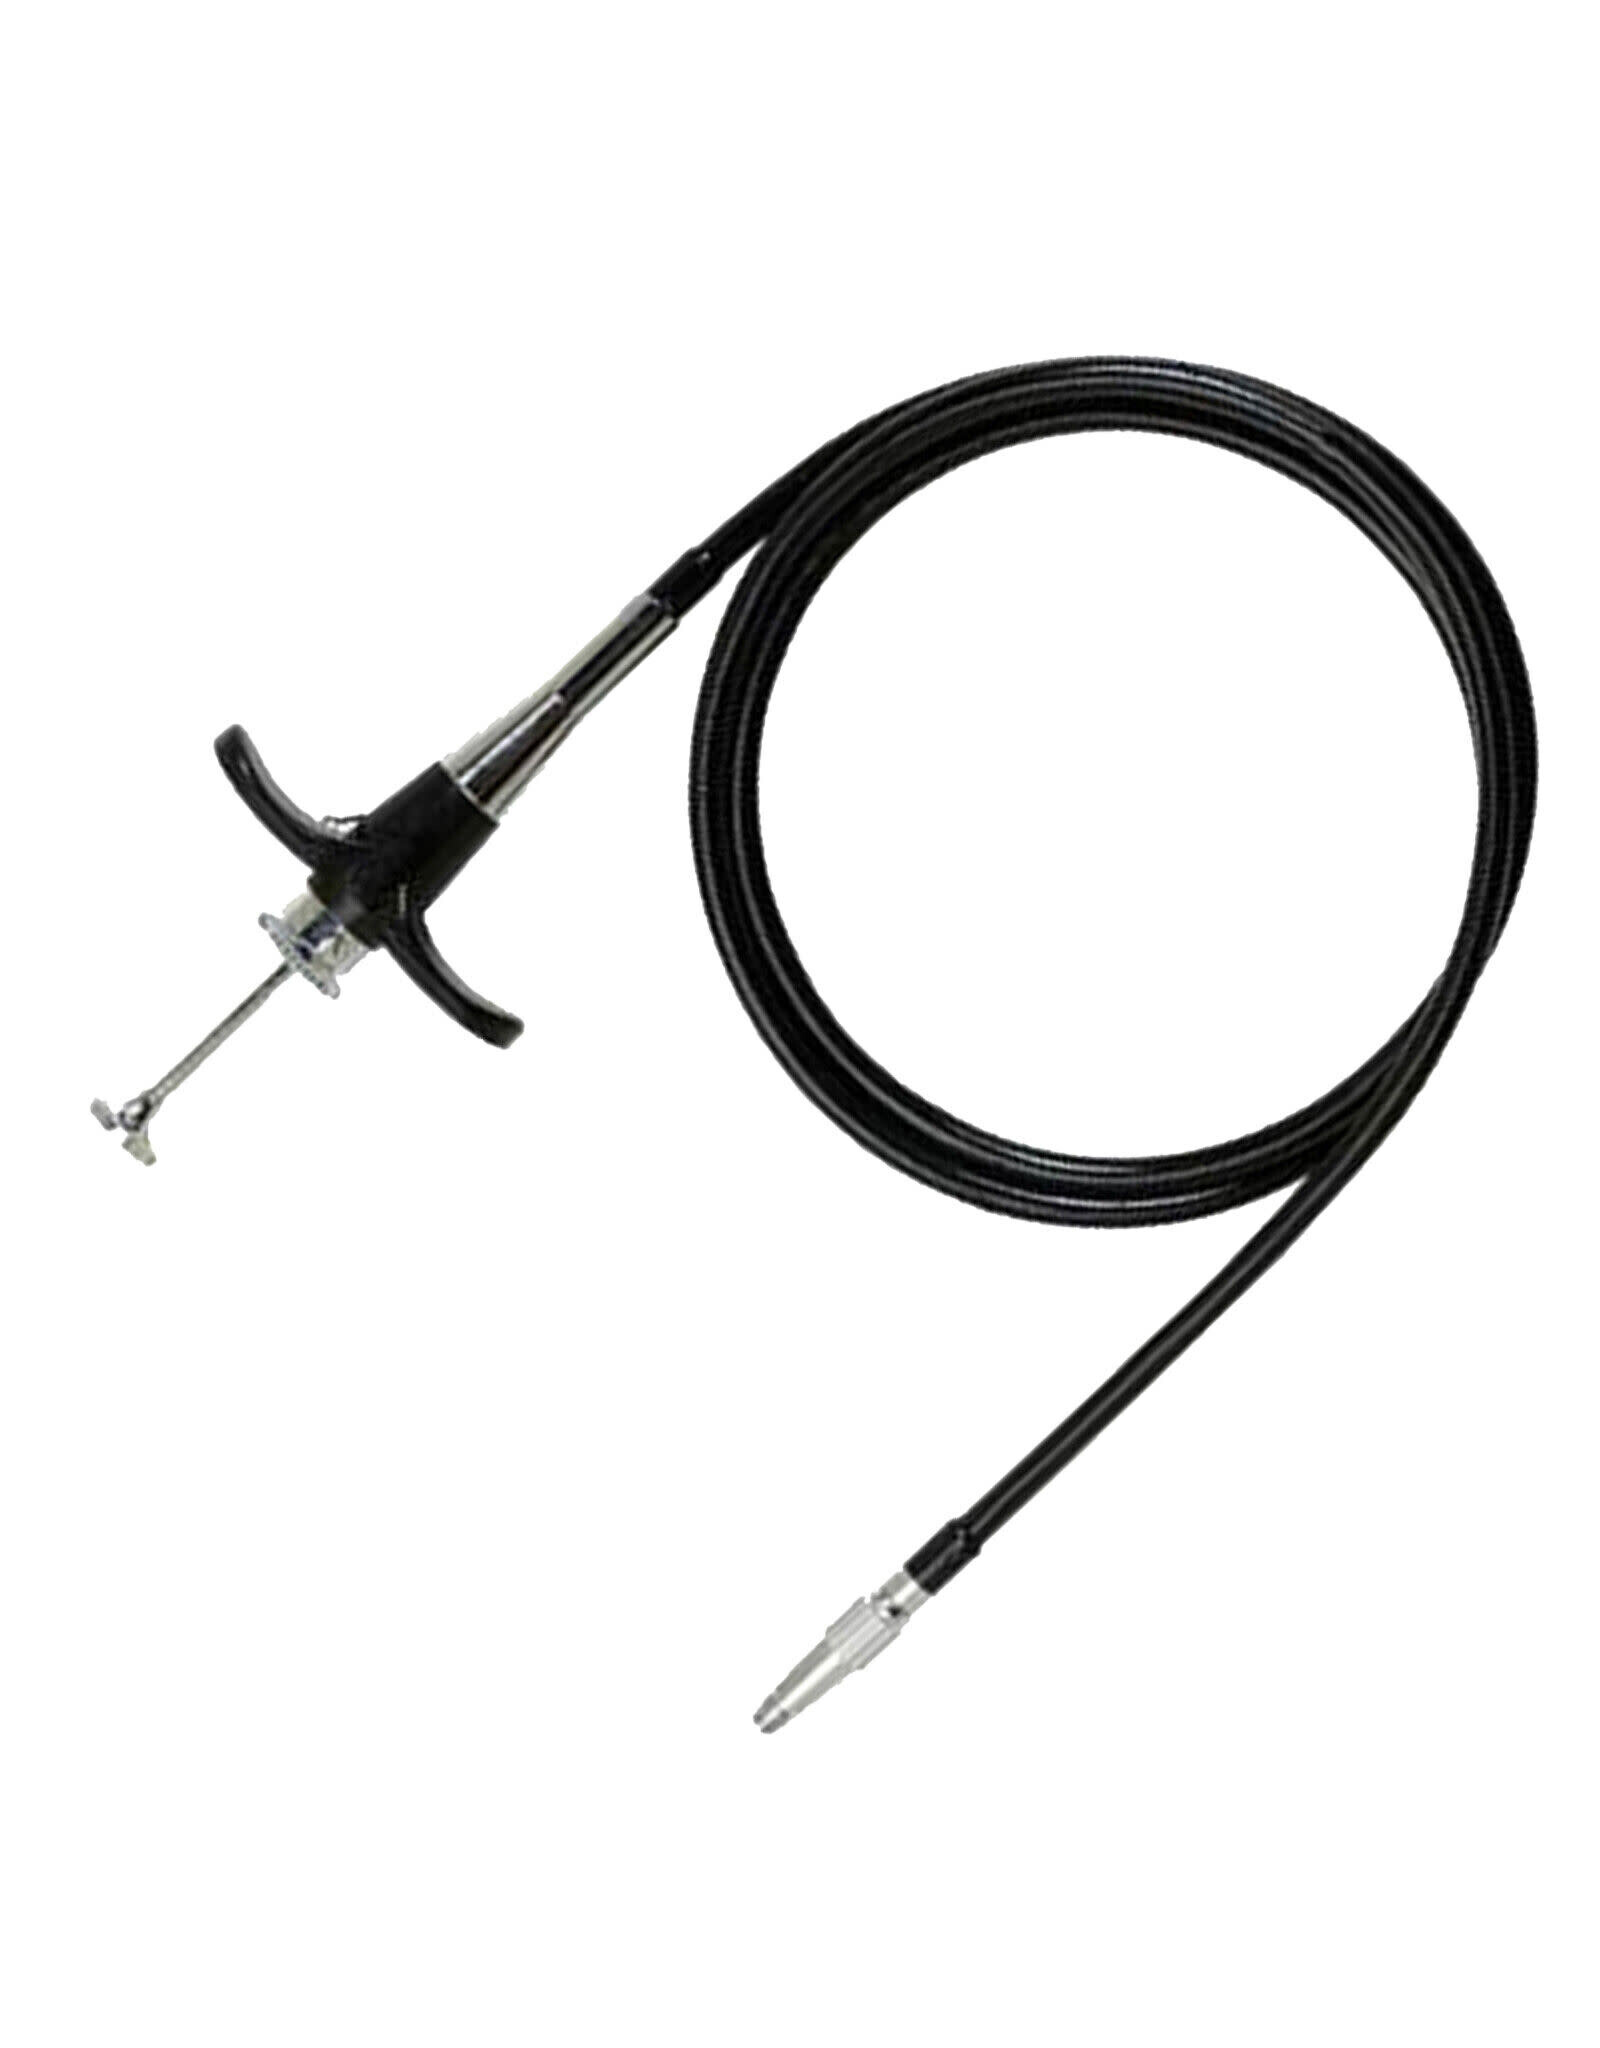 12" Locking Cable Shutter Release with Auto Lock